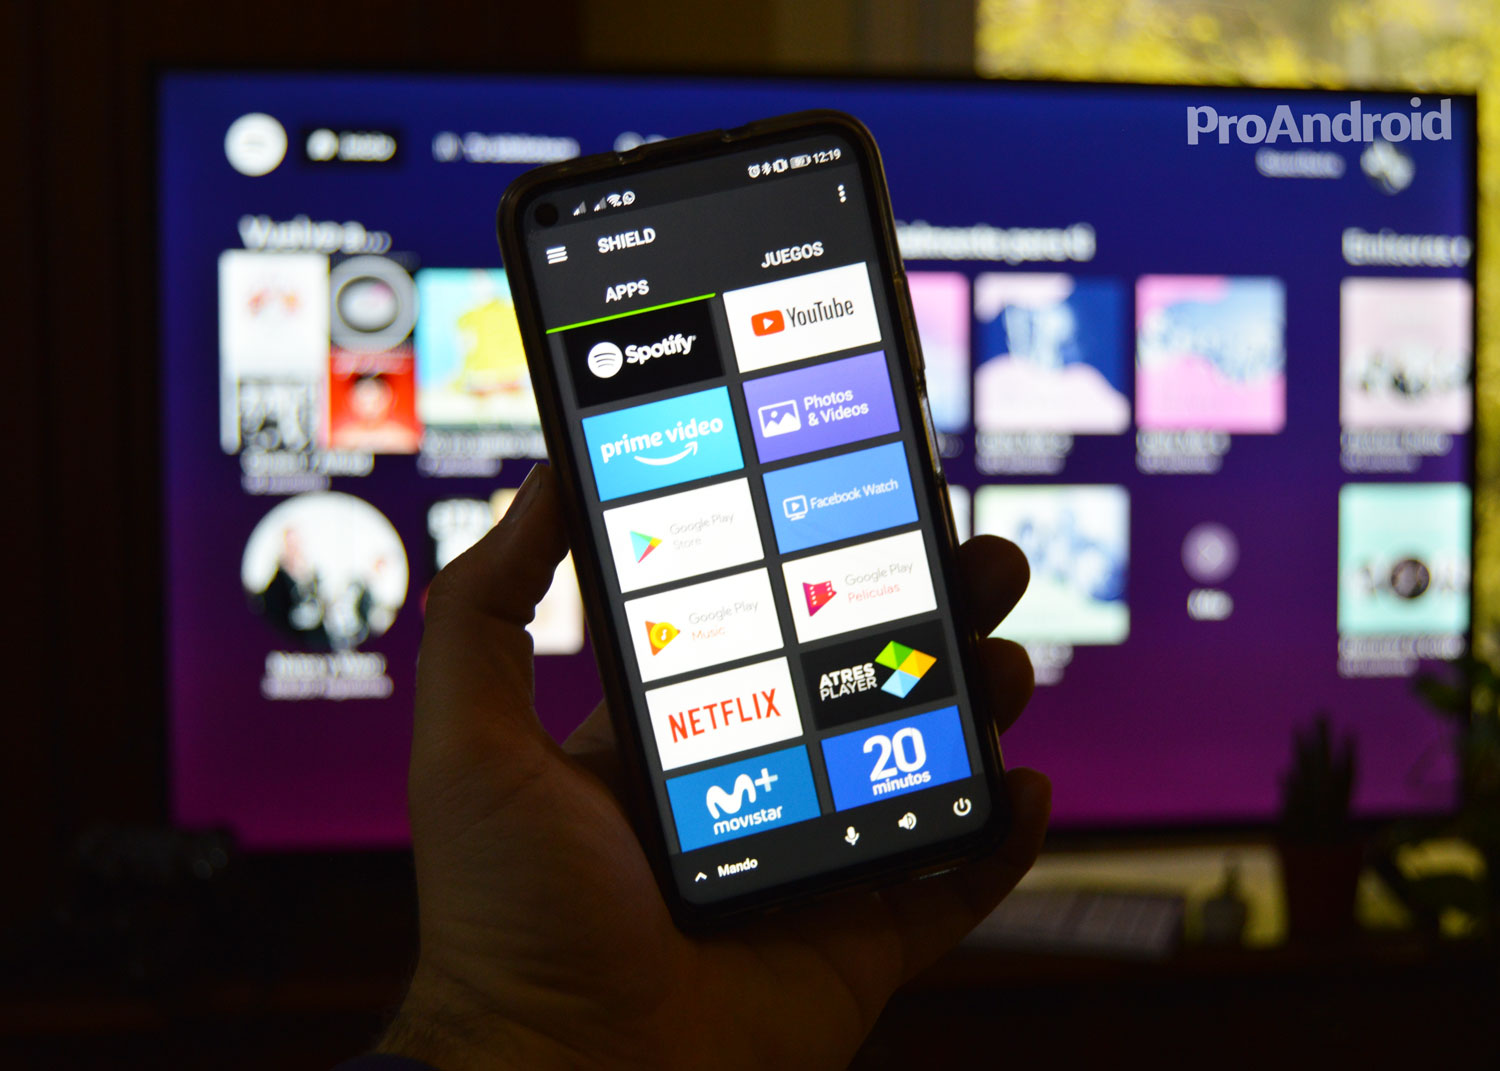 How to see the mobile screen on television: the easiest and cheapest ways